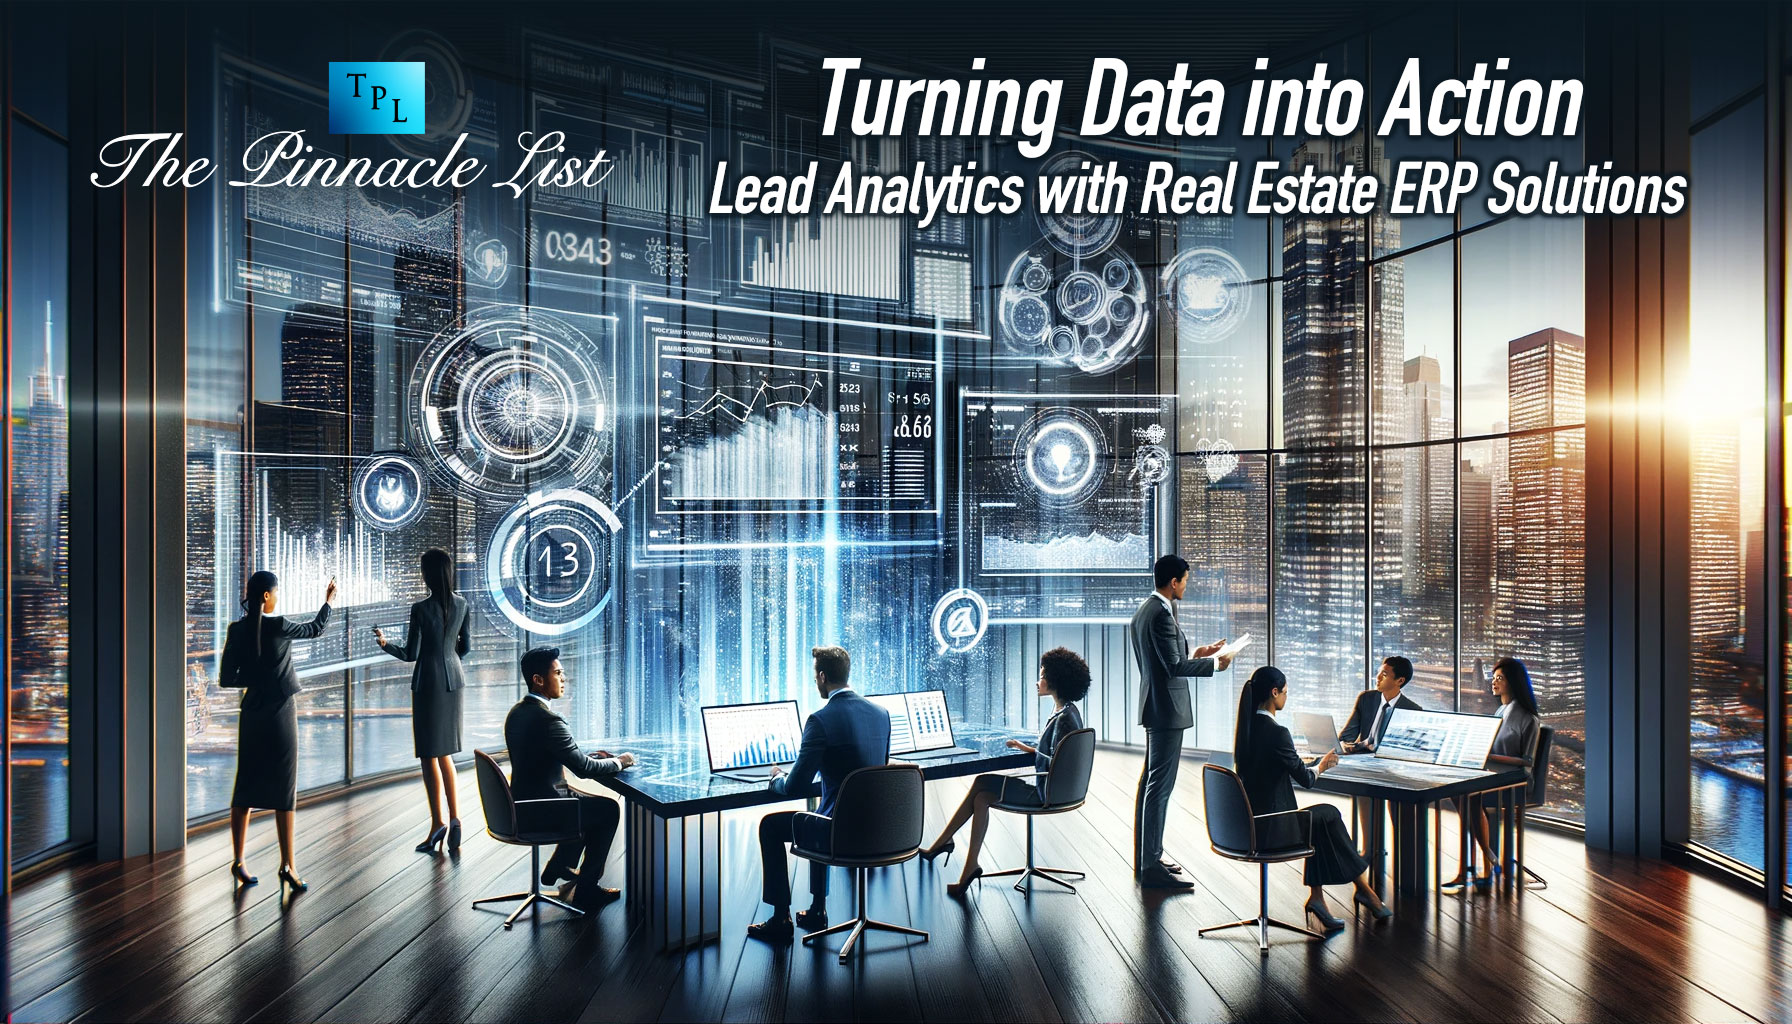 Turning Data into Action: Lead Analytics with Real Estate ERP Solutions